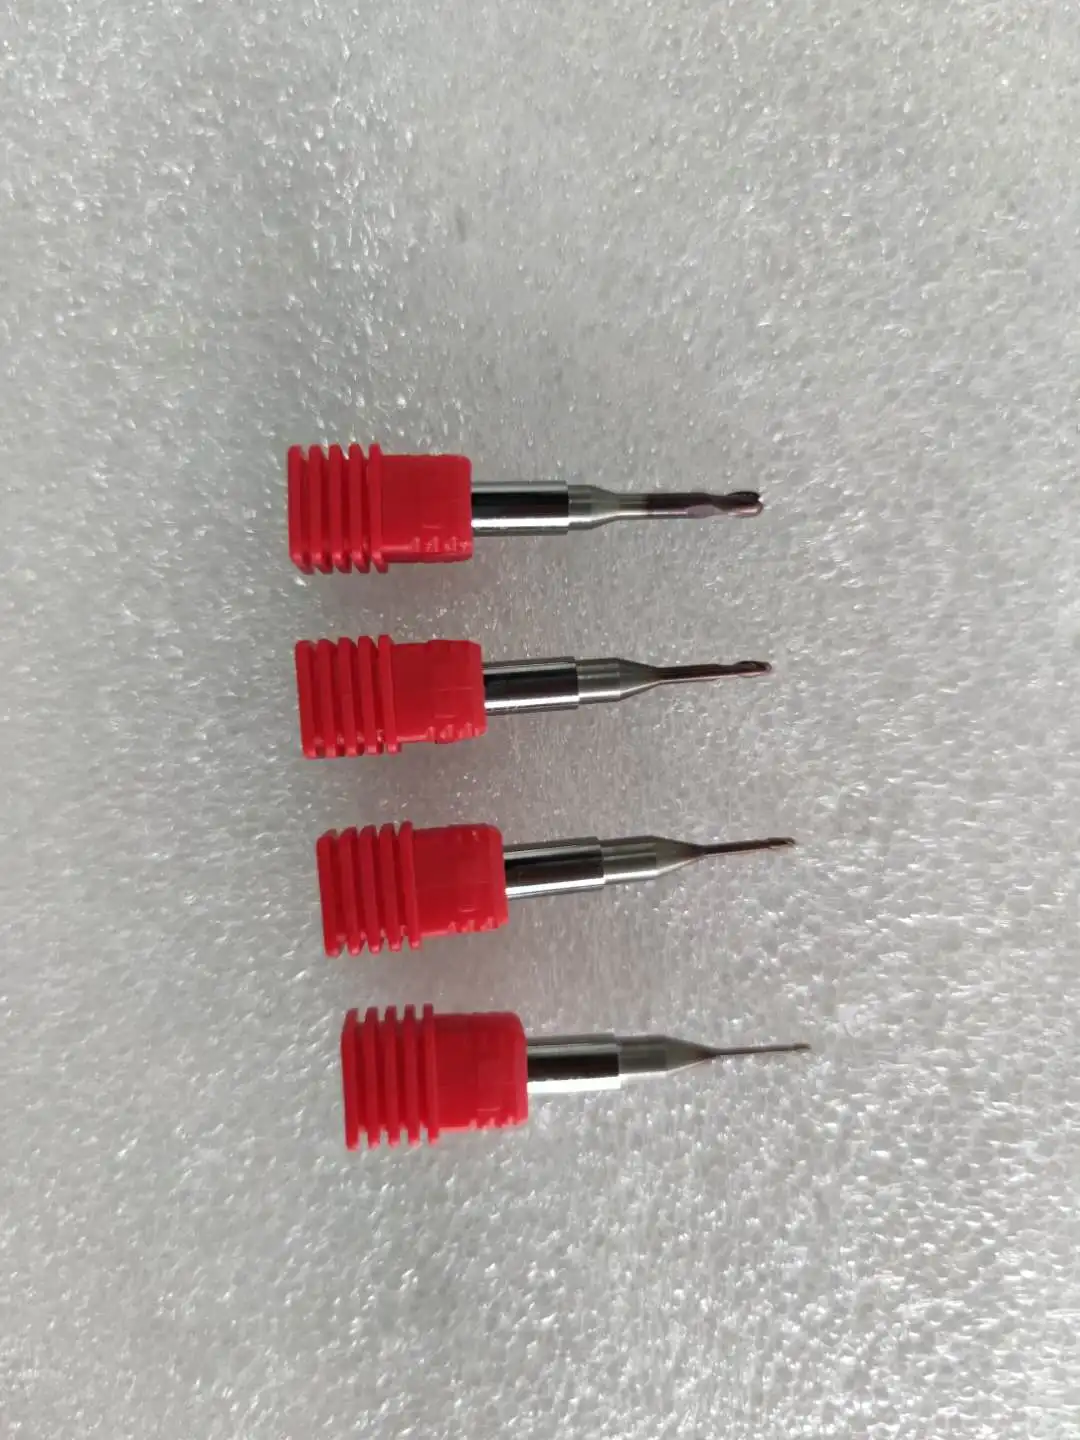 Imes Icore Machine Milling Cutter High Quality DC Burs for Teeth with Diamond Carbon Coating CADCAM Restoration Cutting Tool